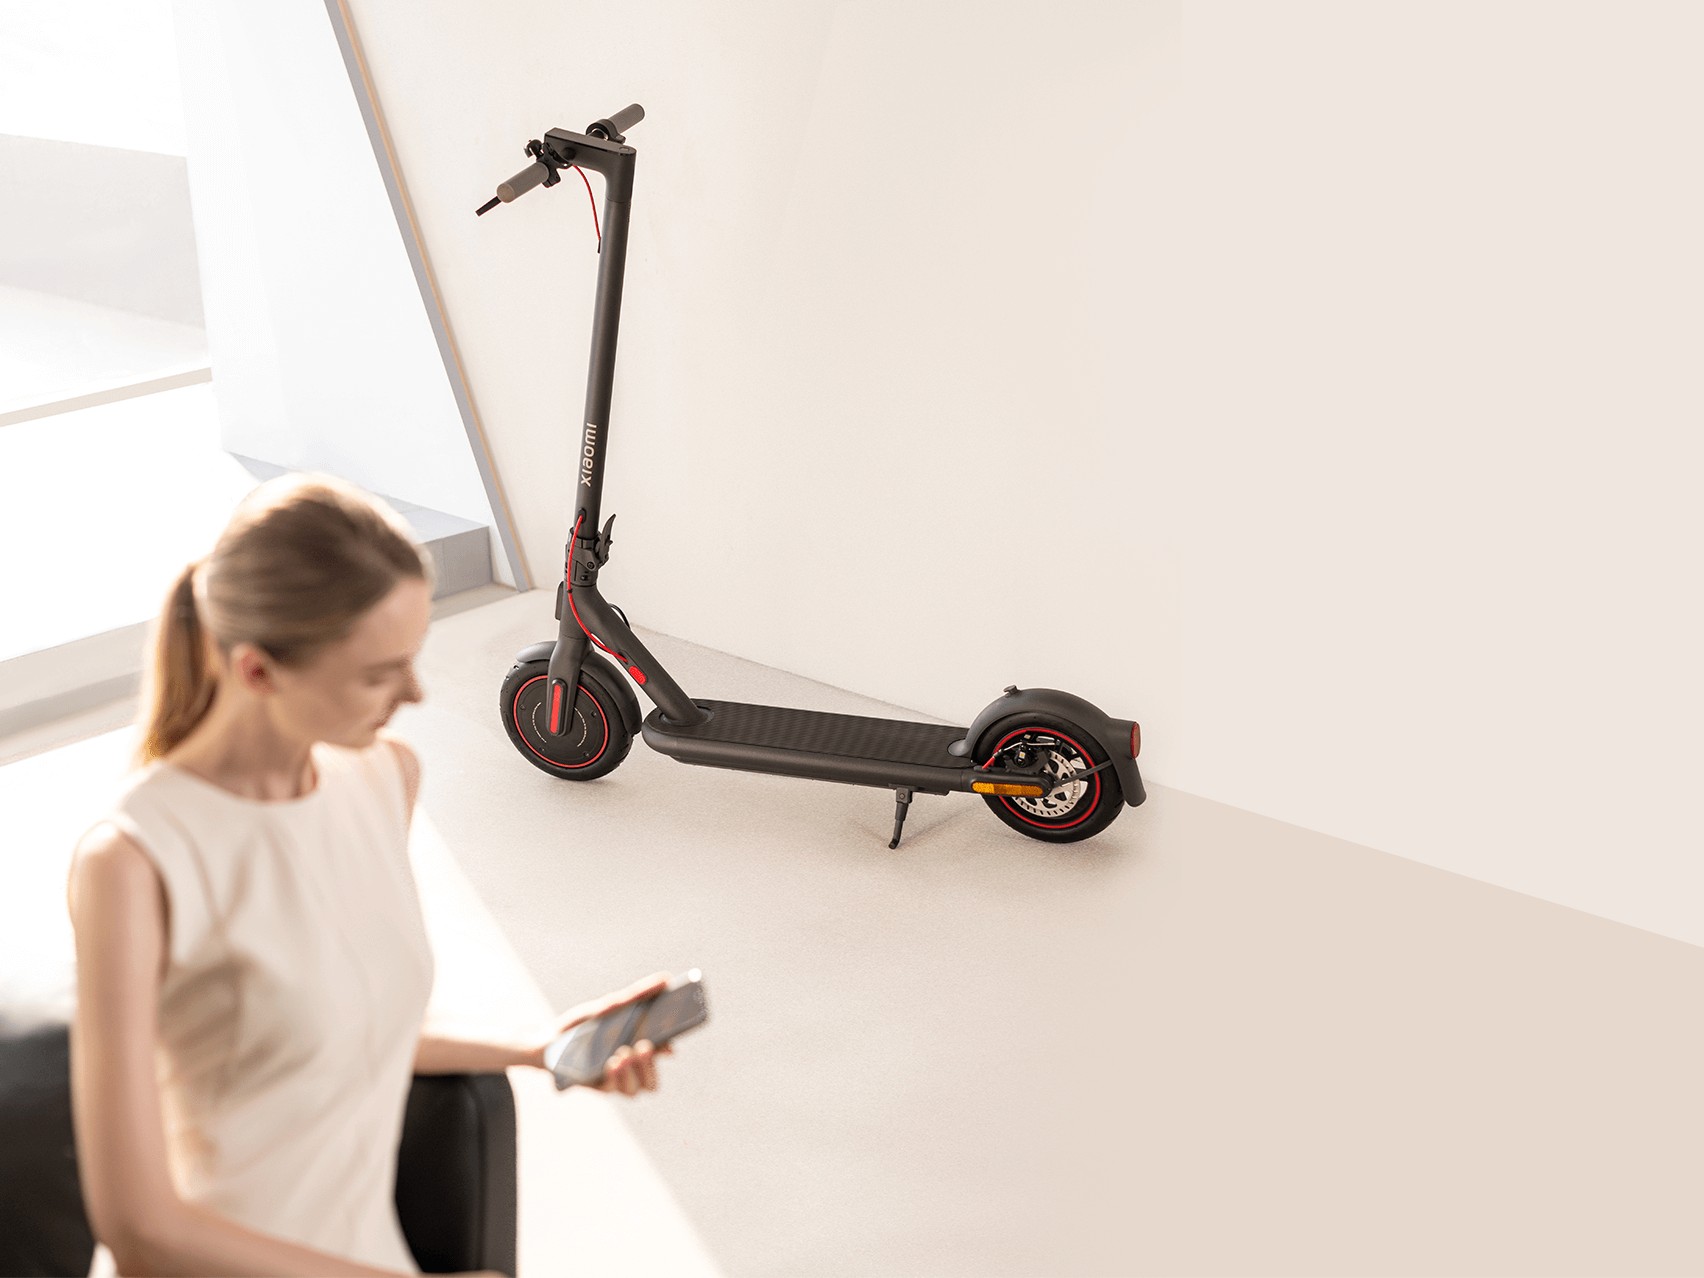 Xiaomi Electric Scooter 4 Pro Launched in Europe! 